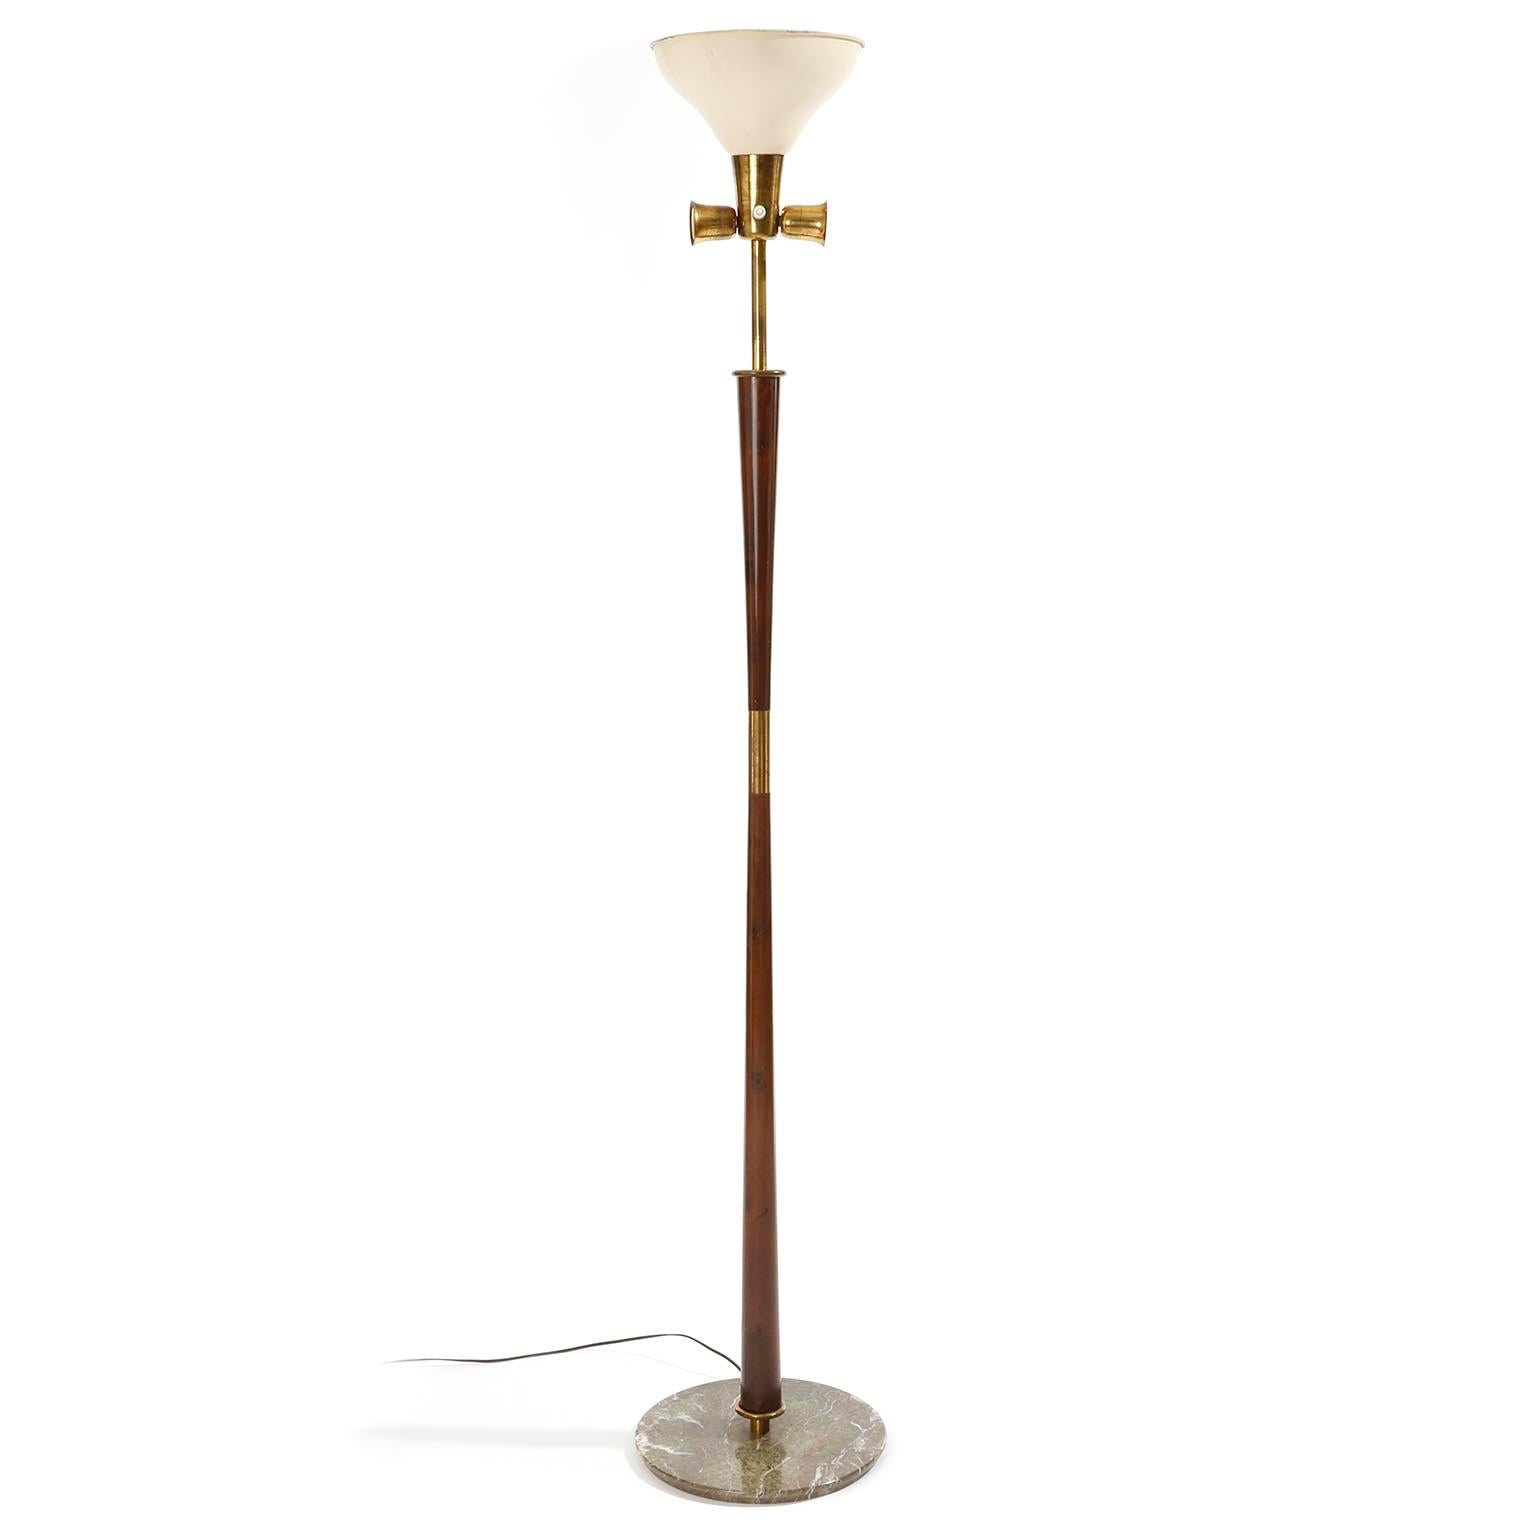 Mid-Century Modern Floor Lamp by Stilnovo, Stained Walnut Brass Marble Base, circa 1946-48 For Sale